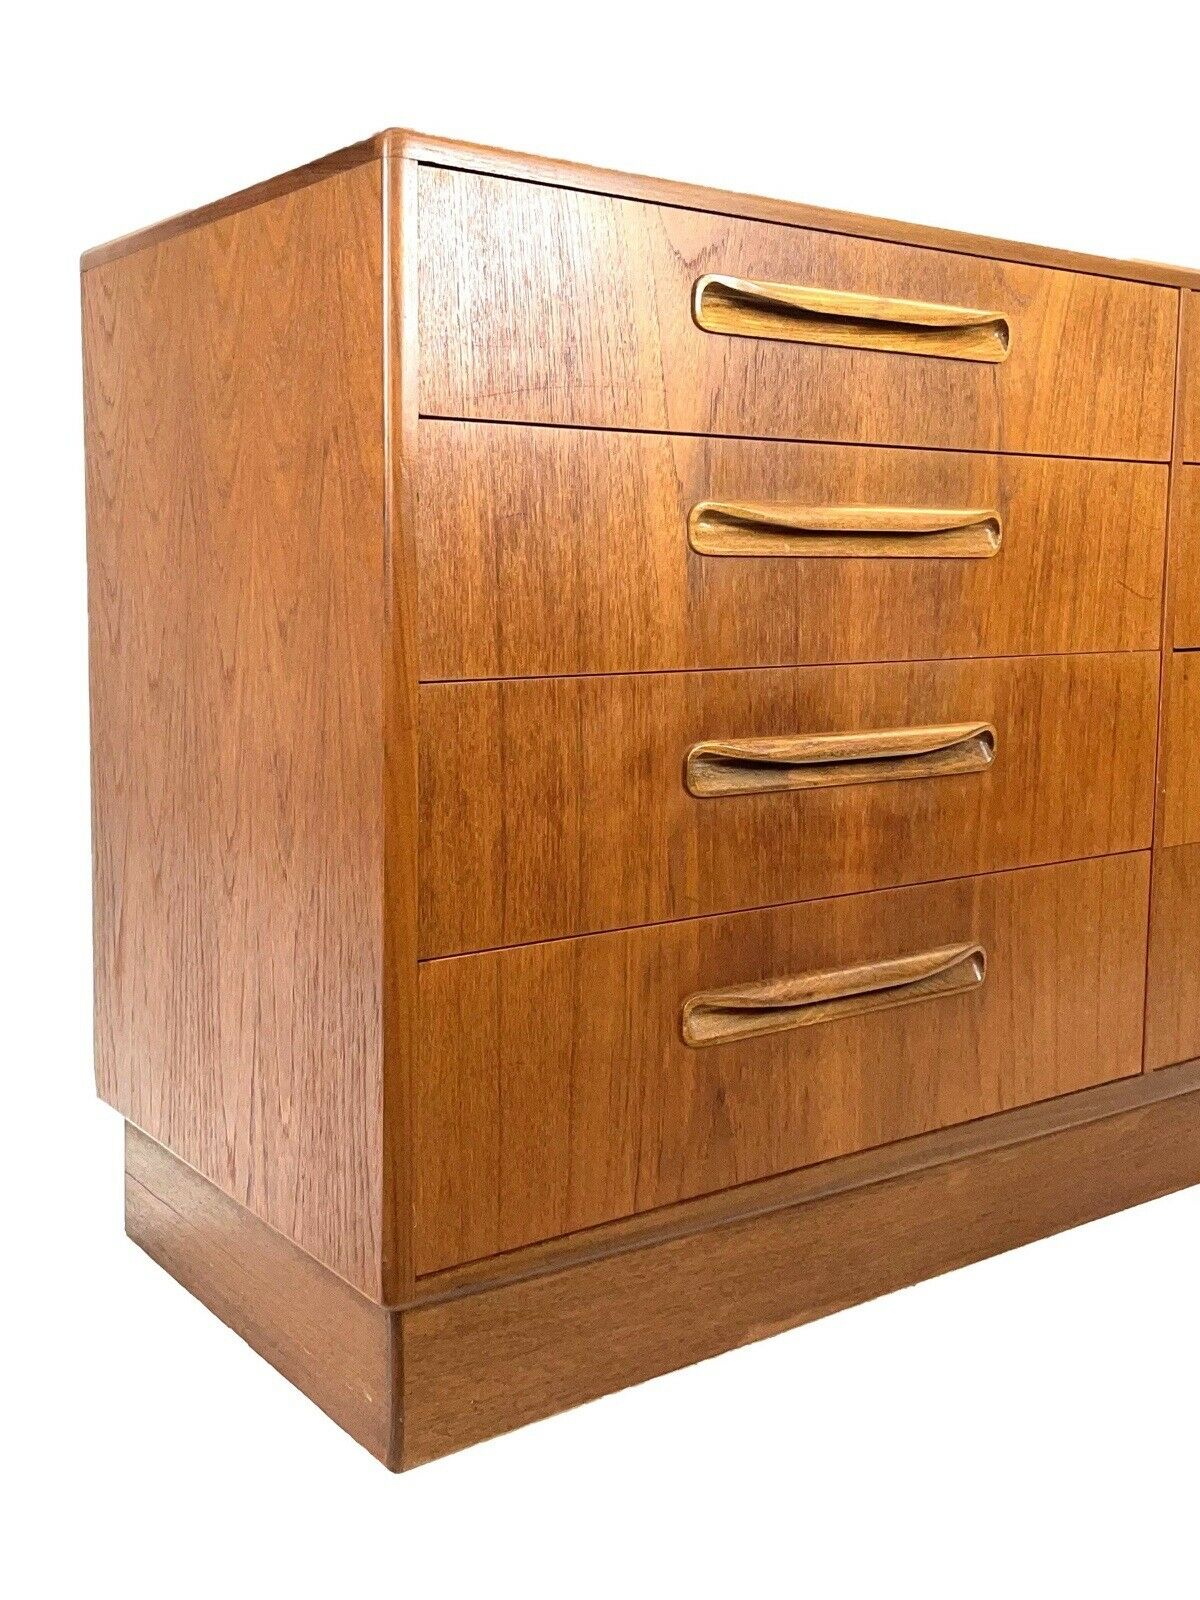 G Plan Fresco, Mid Century Modern, Bank Of 8 Drawers / Chest Of Drawers